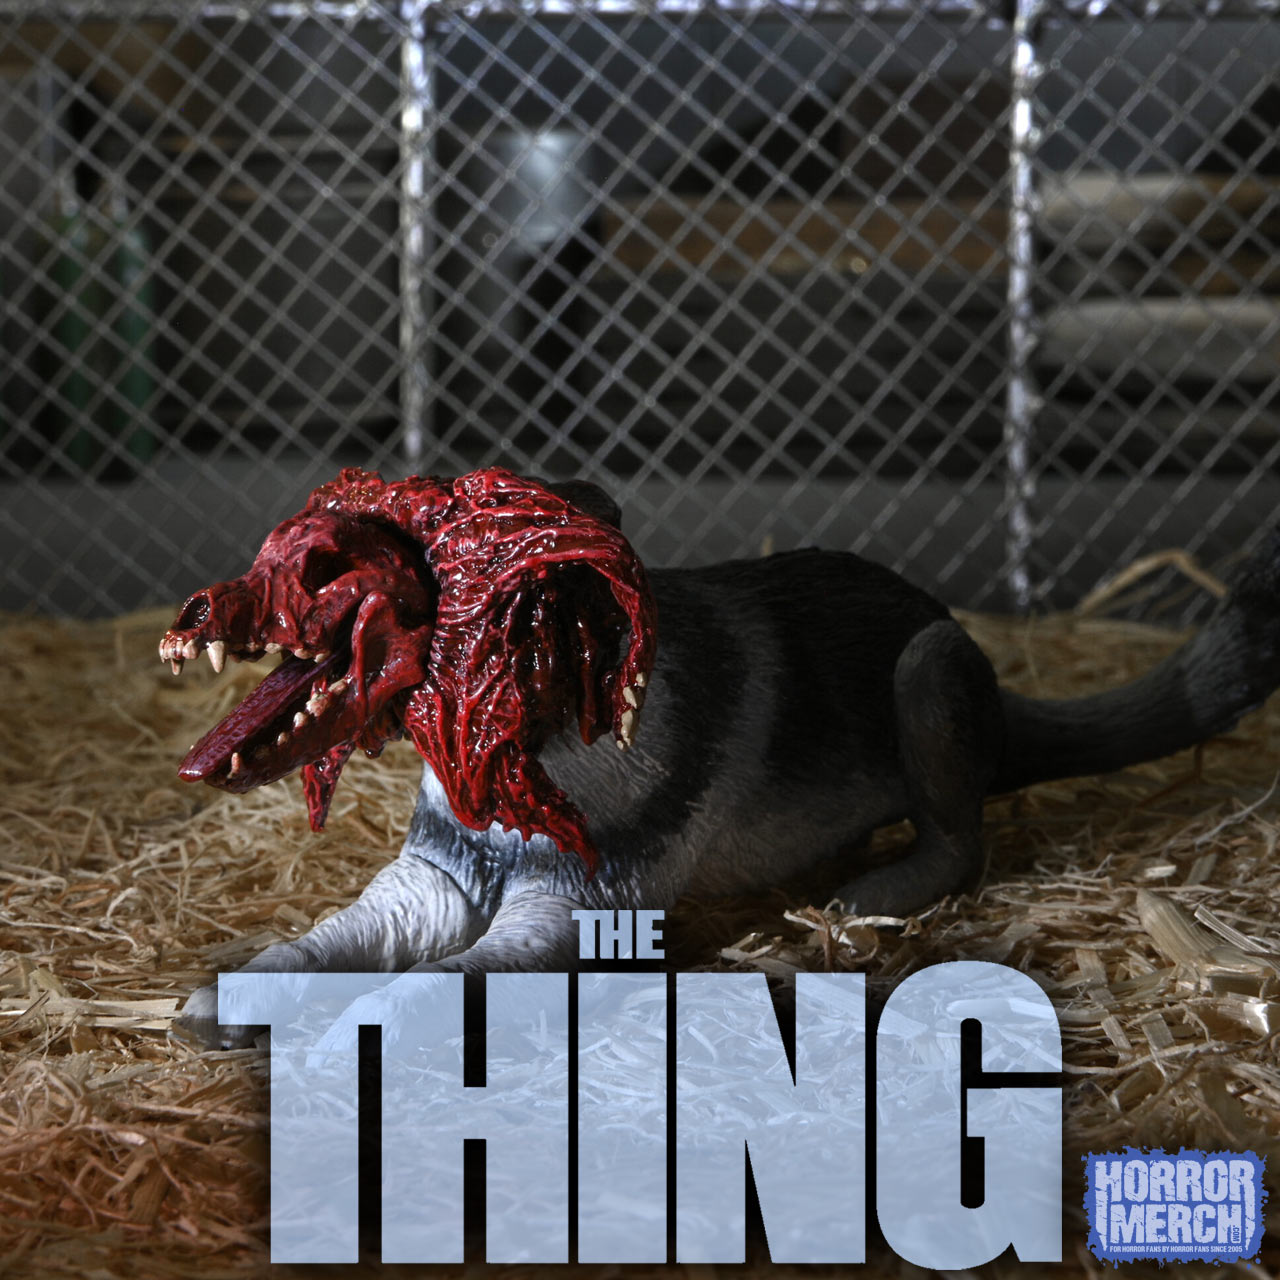 Thing - Deluxe Dog Creature [Figure]